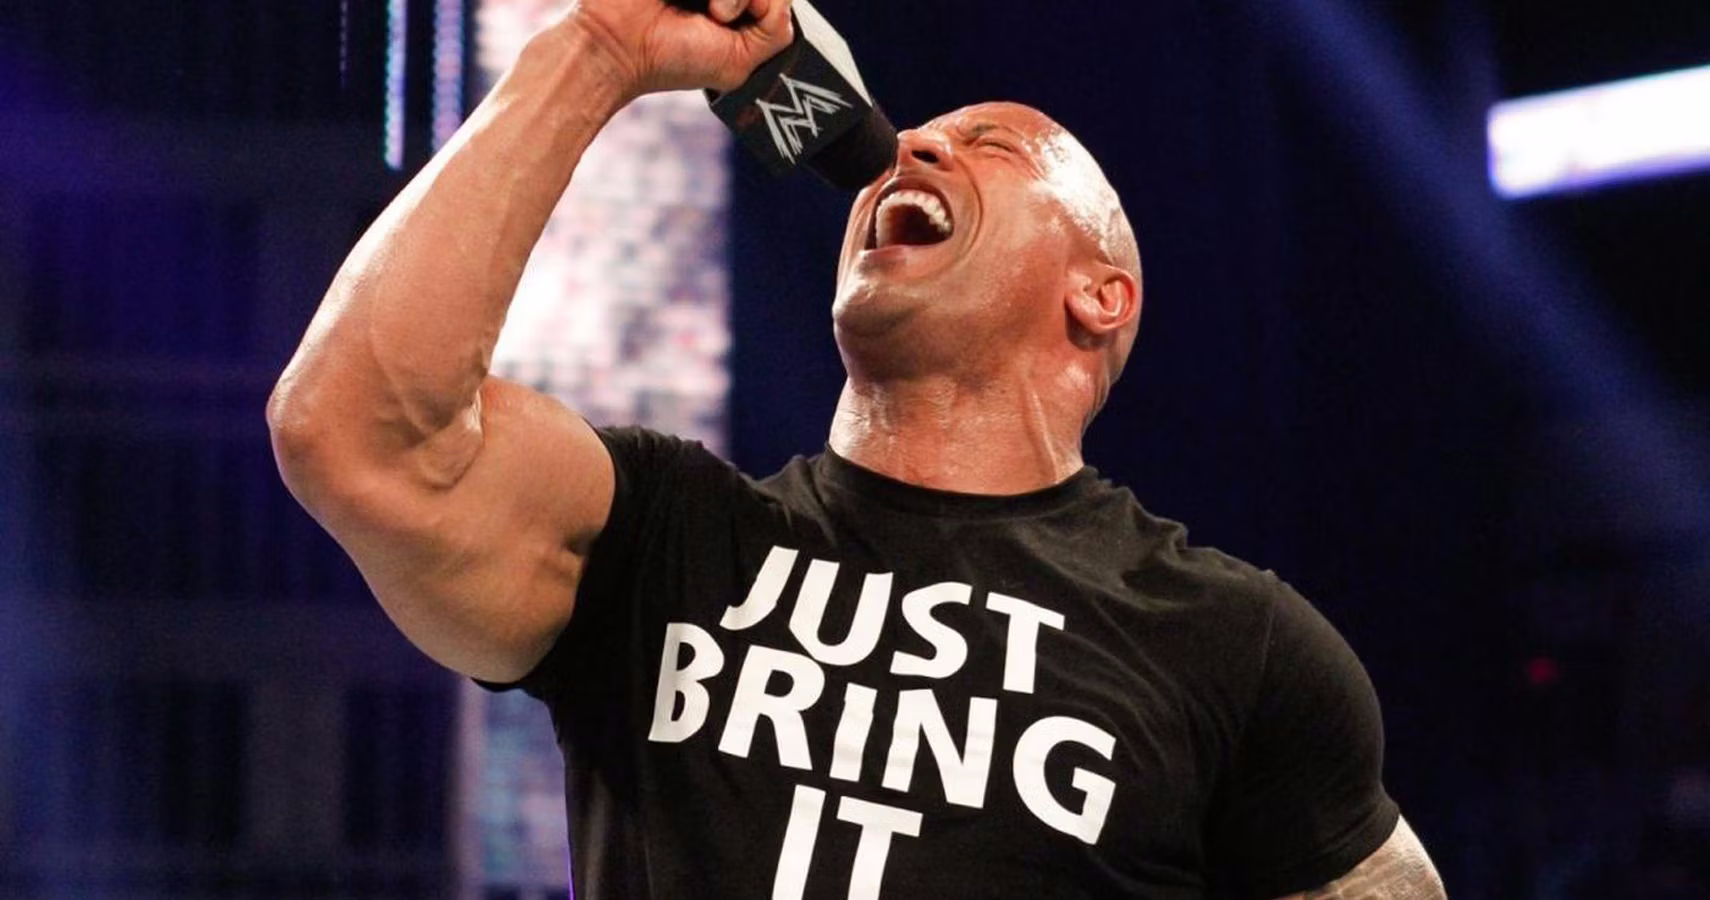 Video: The Rock Reveals Behind-The-Scenes Footage Of His New Christmas ...